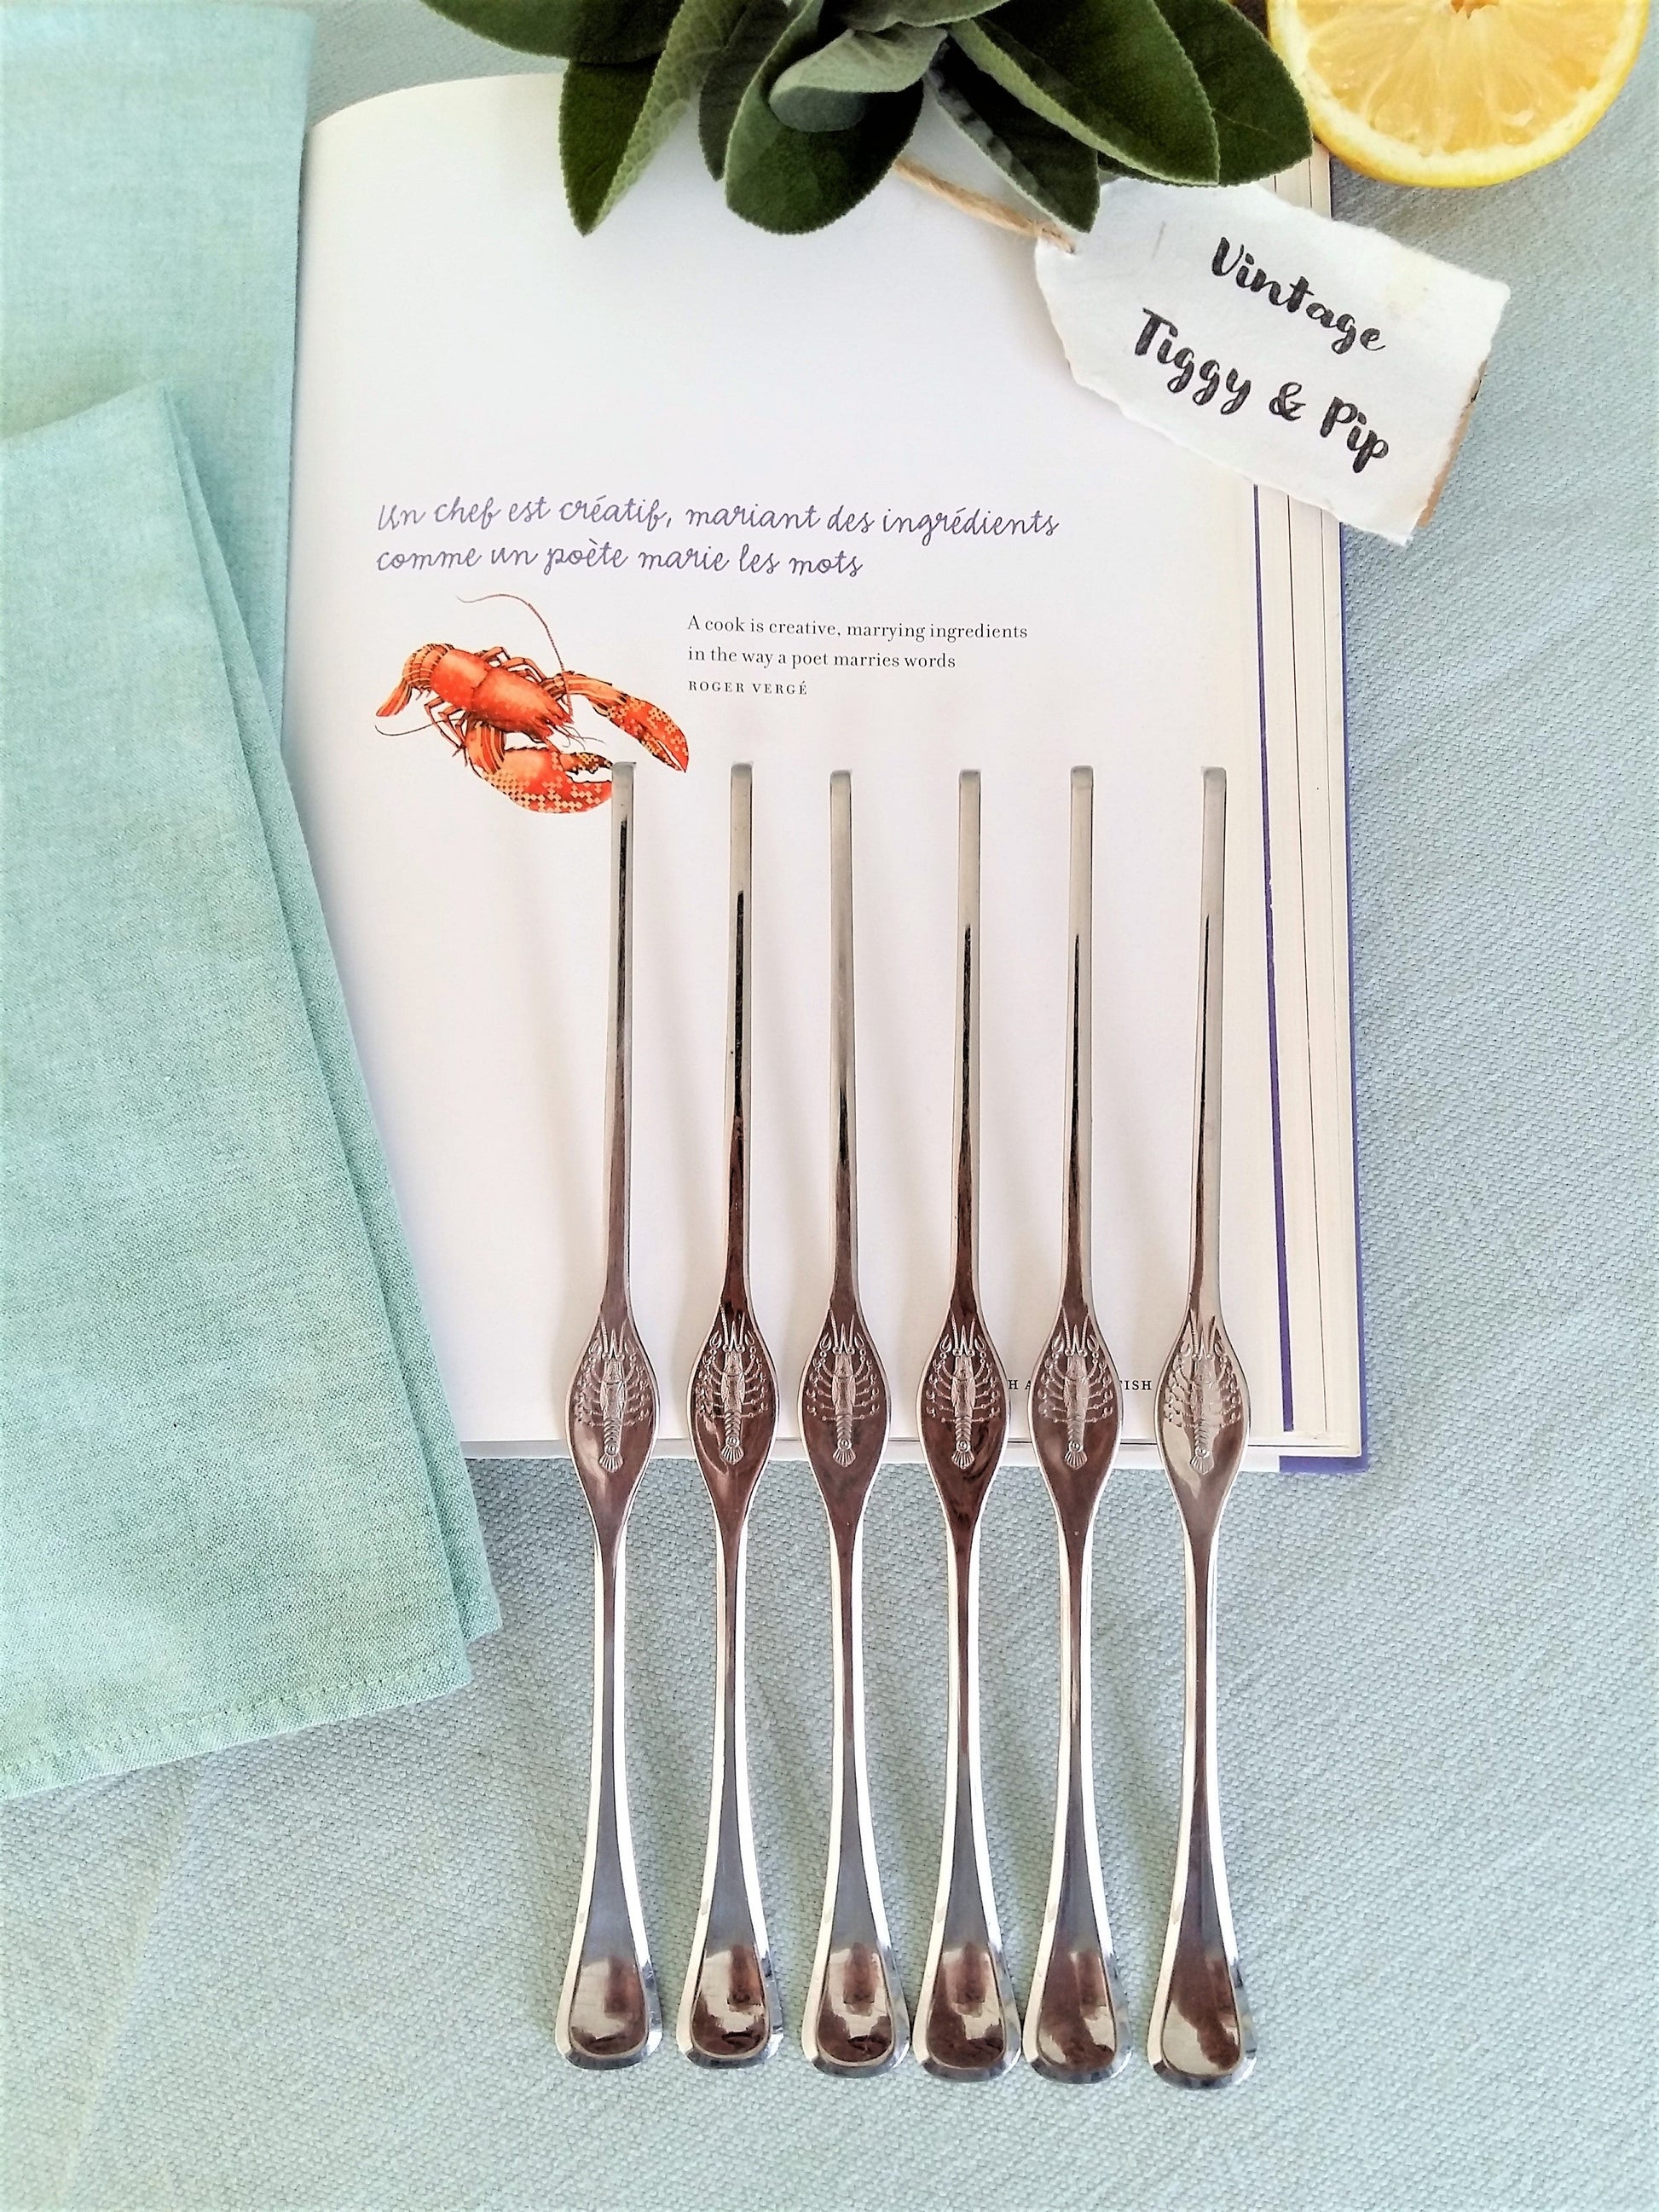 Six Lobster Picks. Crayfish, Crab Forks from Tiggy & Pip - €60.00! Shop now at Tiggy and Pip